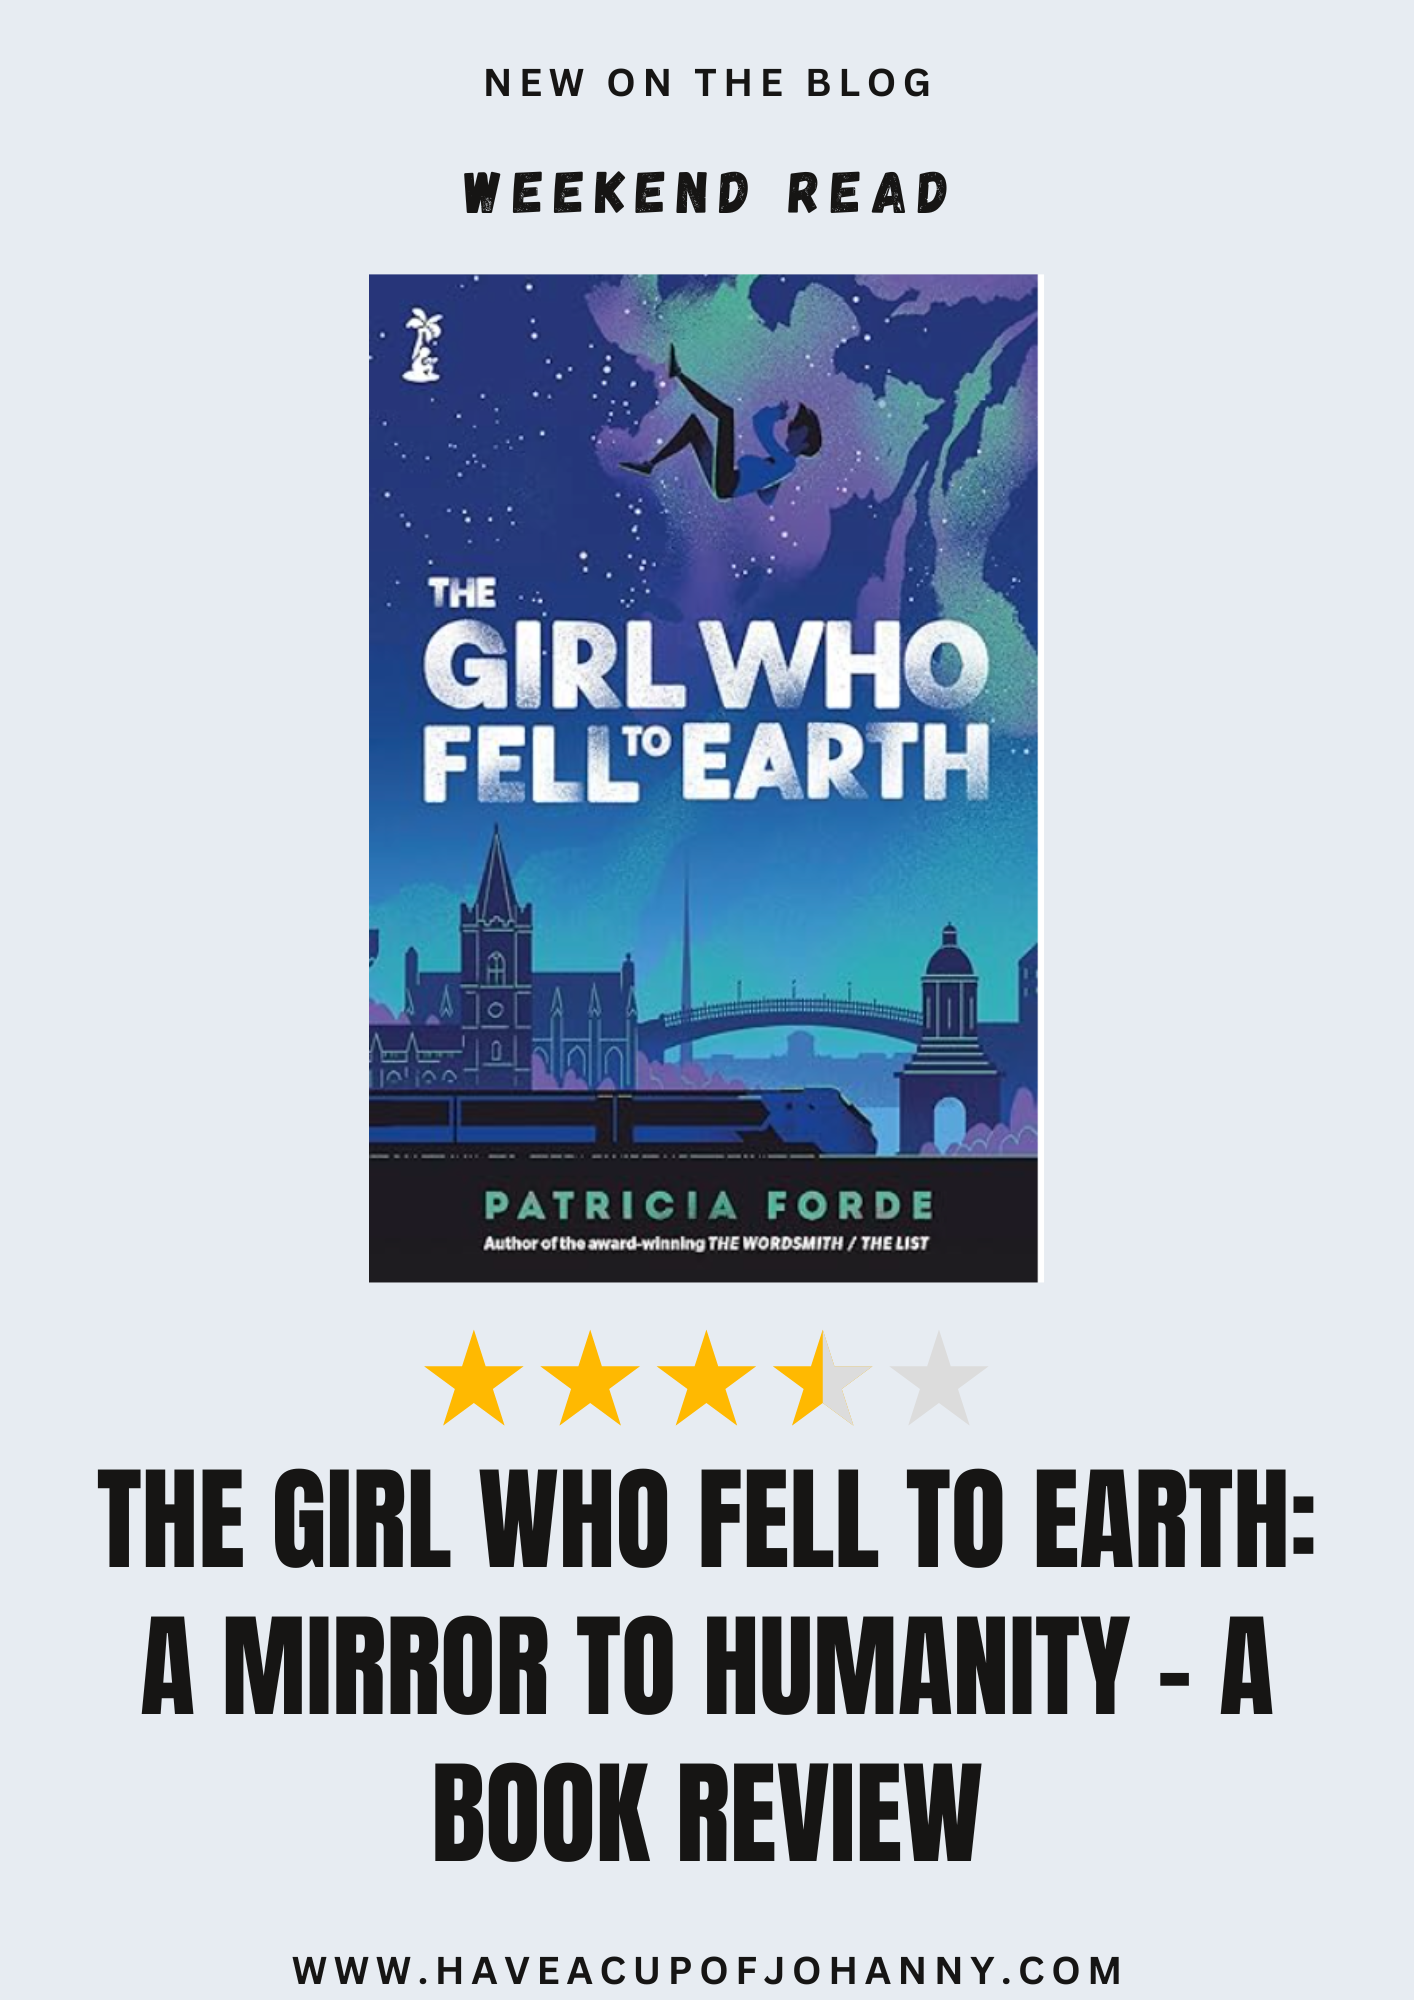 The Girl Who Fell to Earth: A Mirror to Humanity – A Book Review